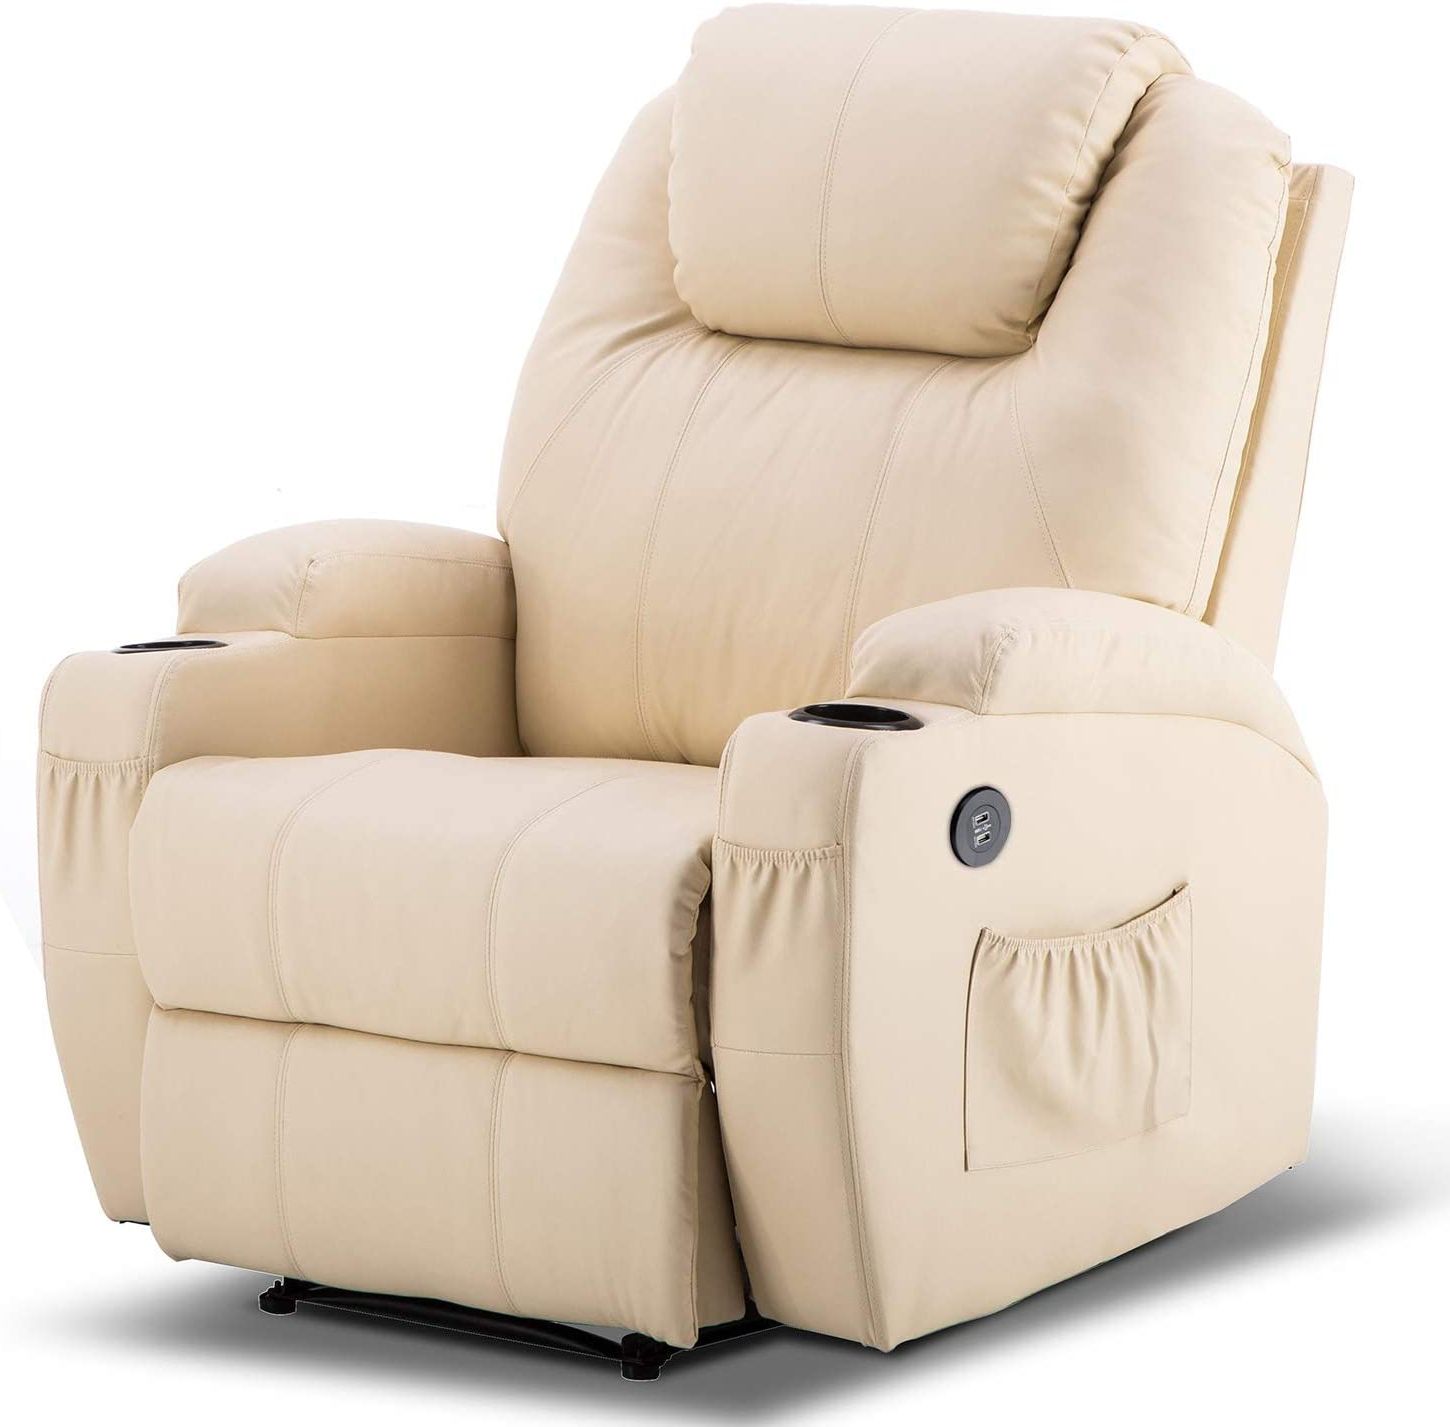 Well Liked Mcombo Electric Power Recliner Chair With Massage And Heat, 2 Positions In Black Faux Leather Usb Charging Ottomans (View 2 of 10)